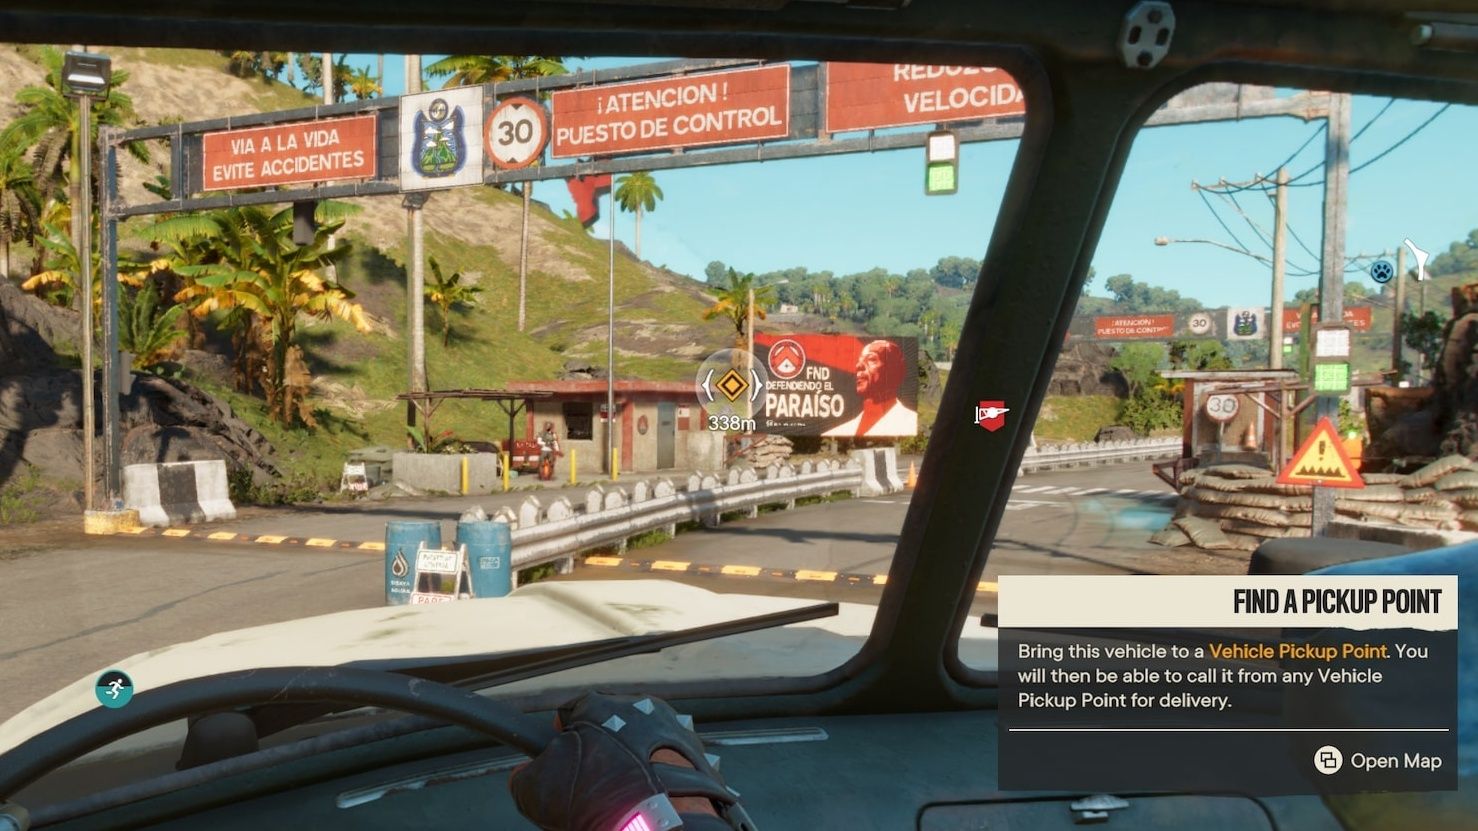 Driving a hijacked vehicle in Far Cry 6, which can be taken to any pick-up point for later use.